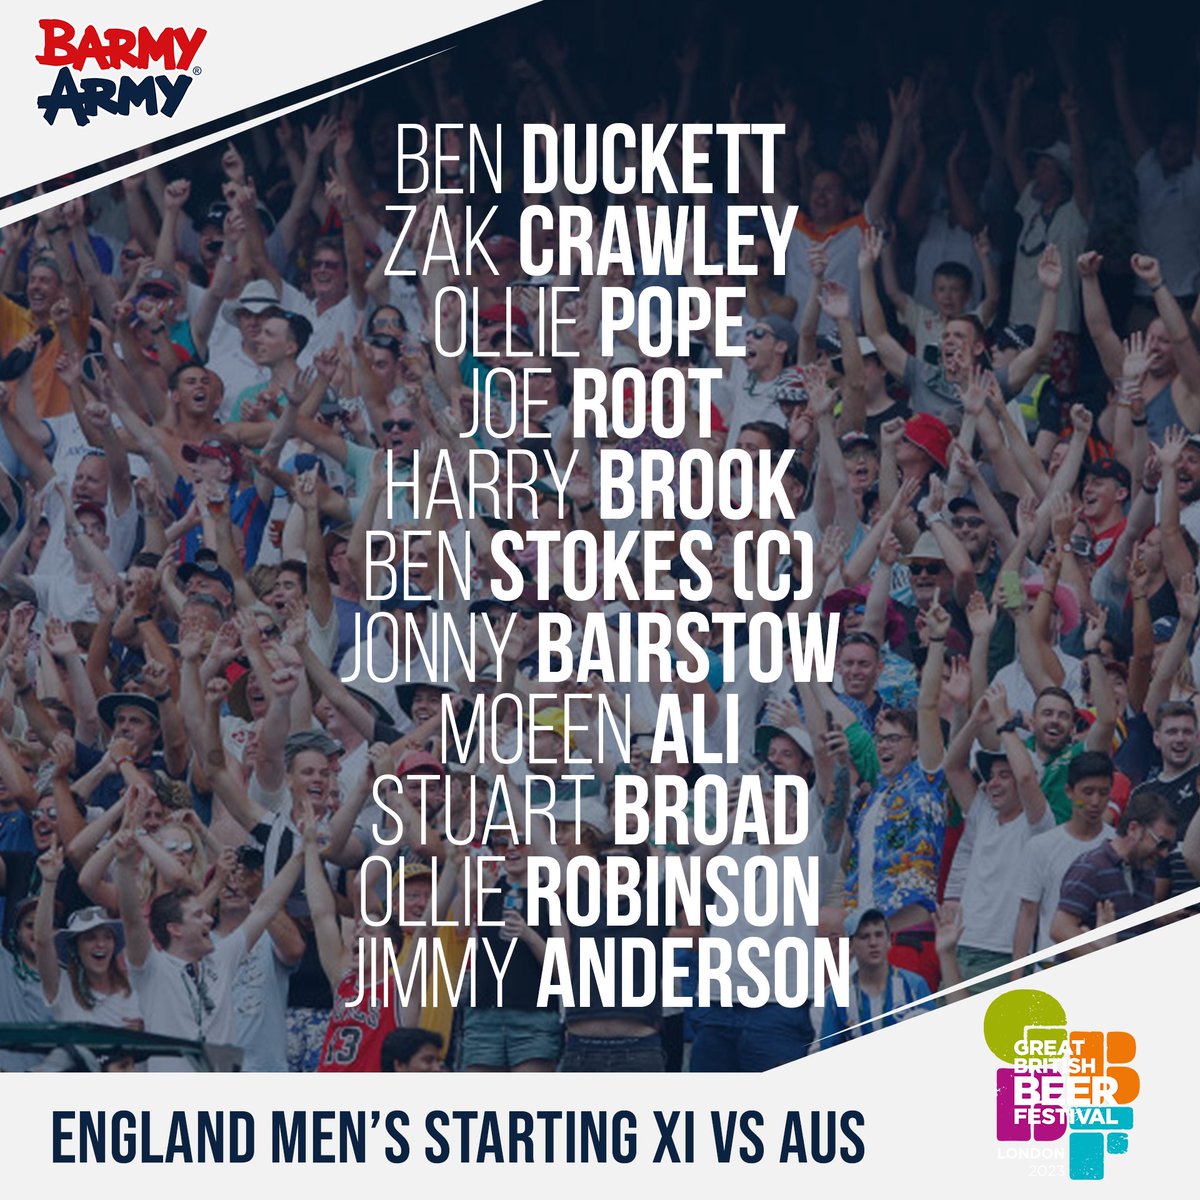 🚨 BREAKING NEWS 🚨 England have named their starting XI for the first Ashes Test match at Edgbaston 🏴󠁧󠁢󠁥󠁮󠁧󠁿🏏 @gbbf | #Ashes